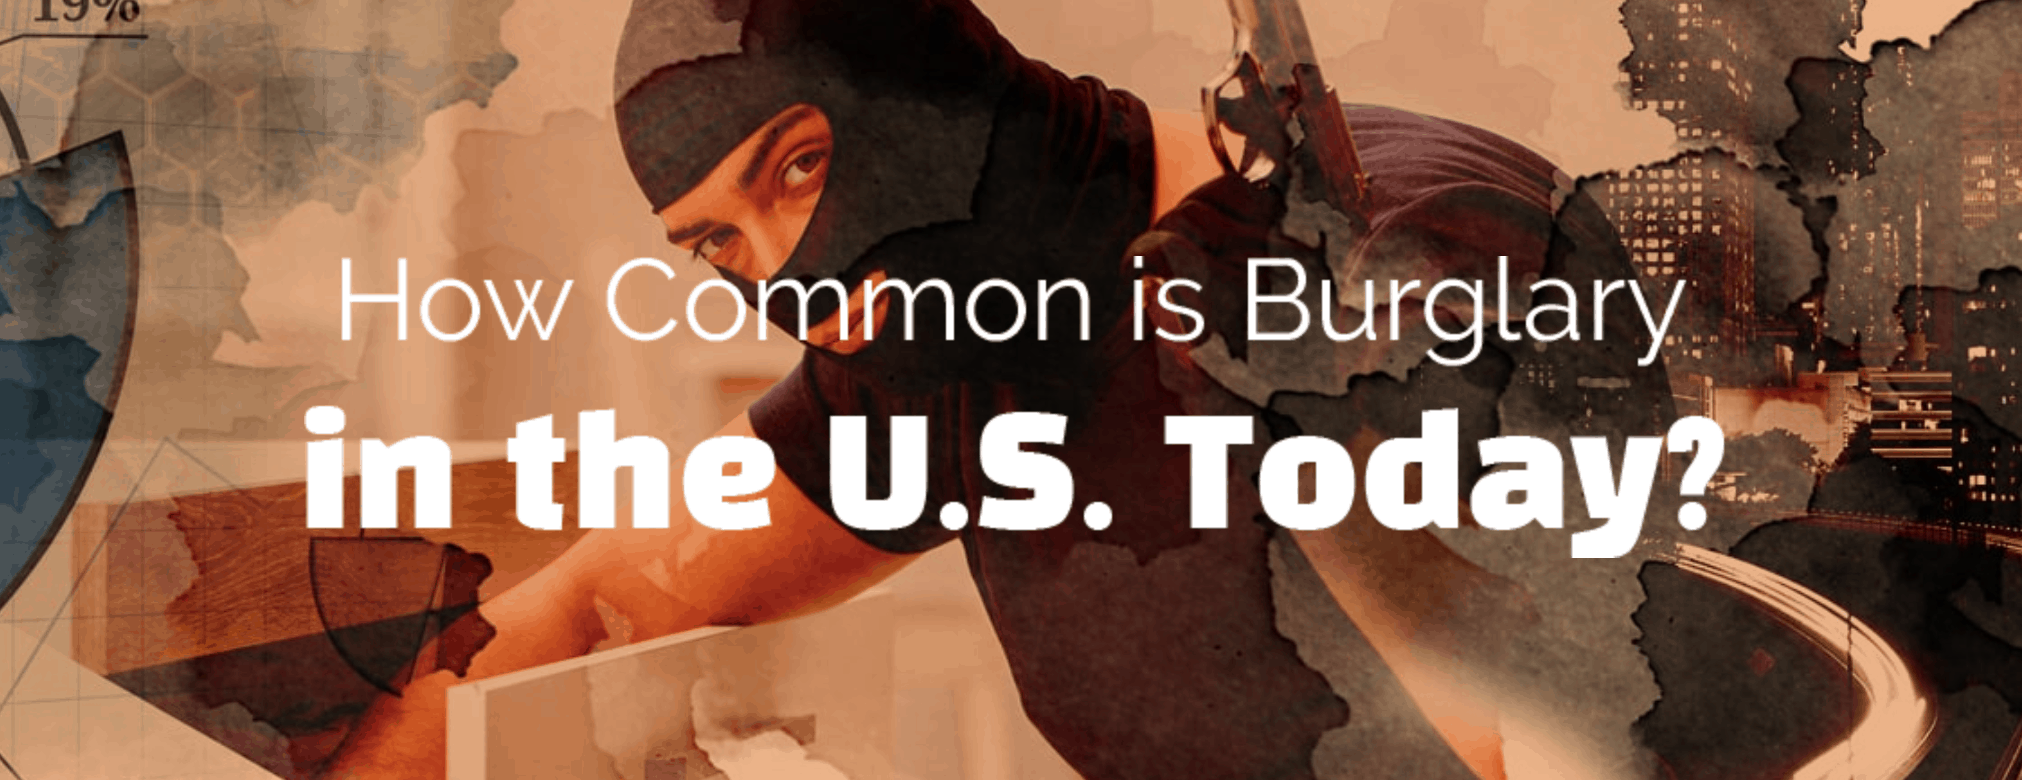 How Common is Burglary in the U.S. Today? Featured Image